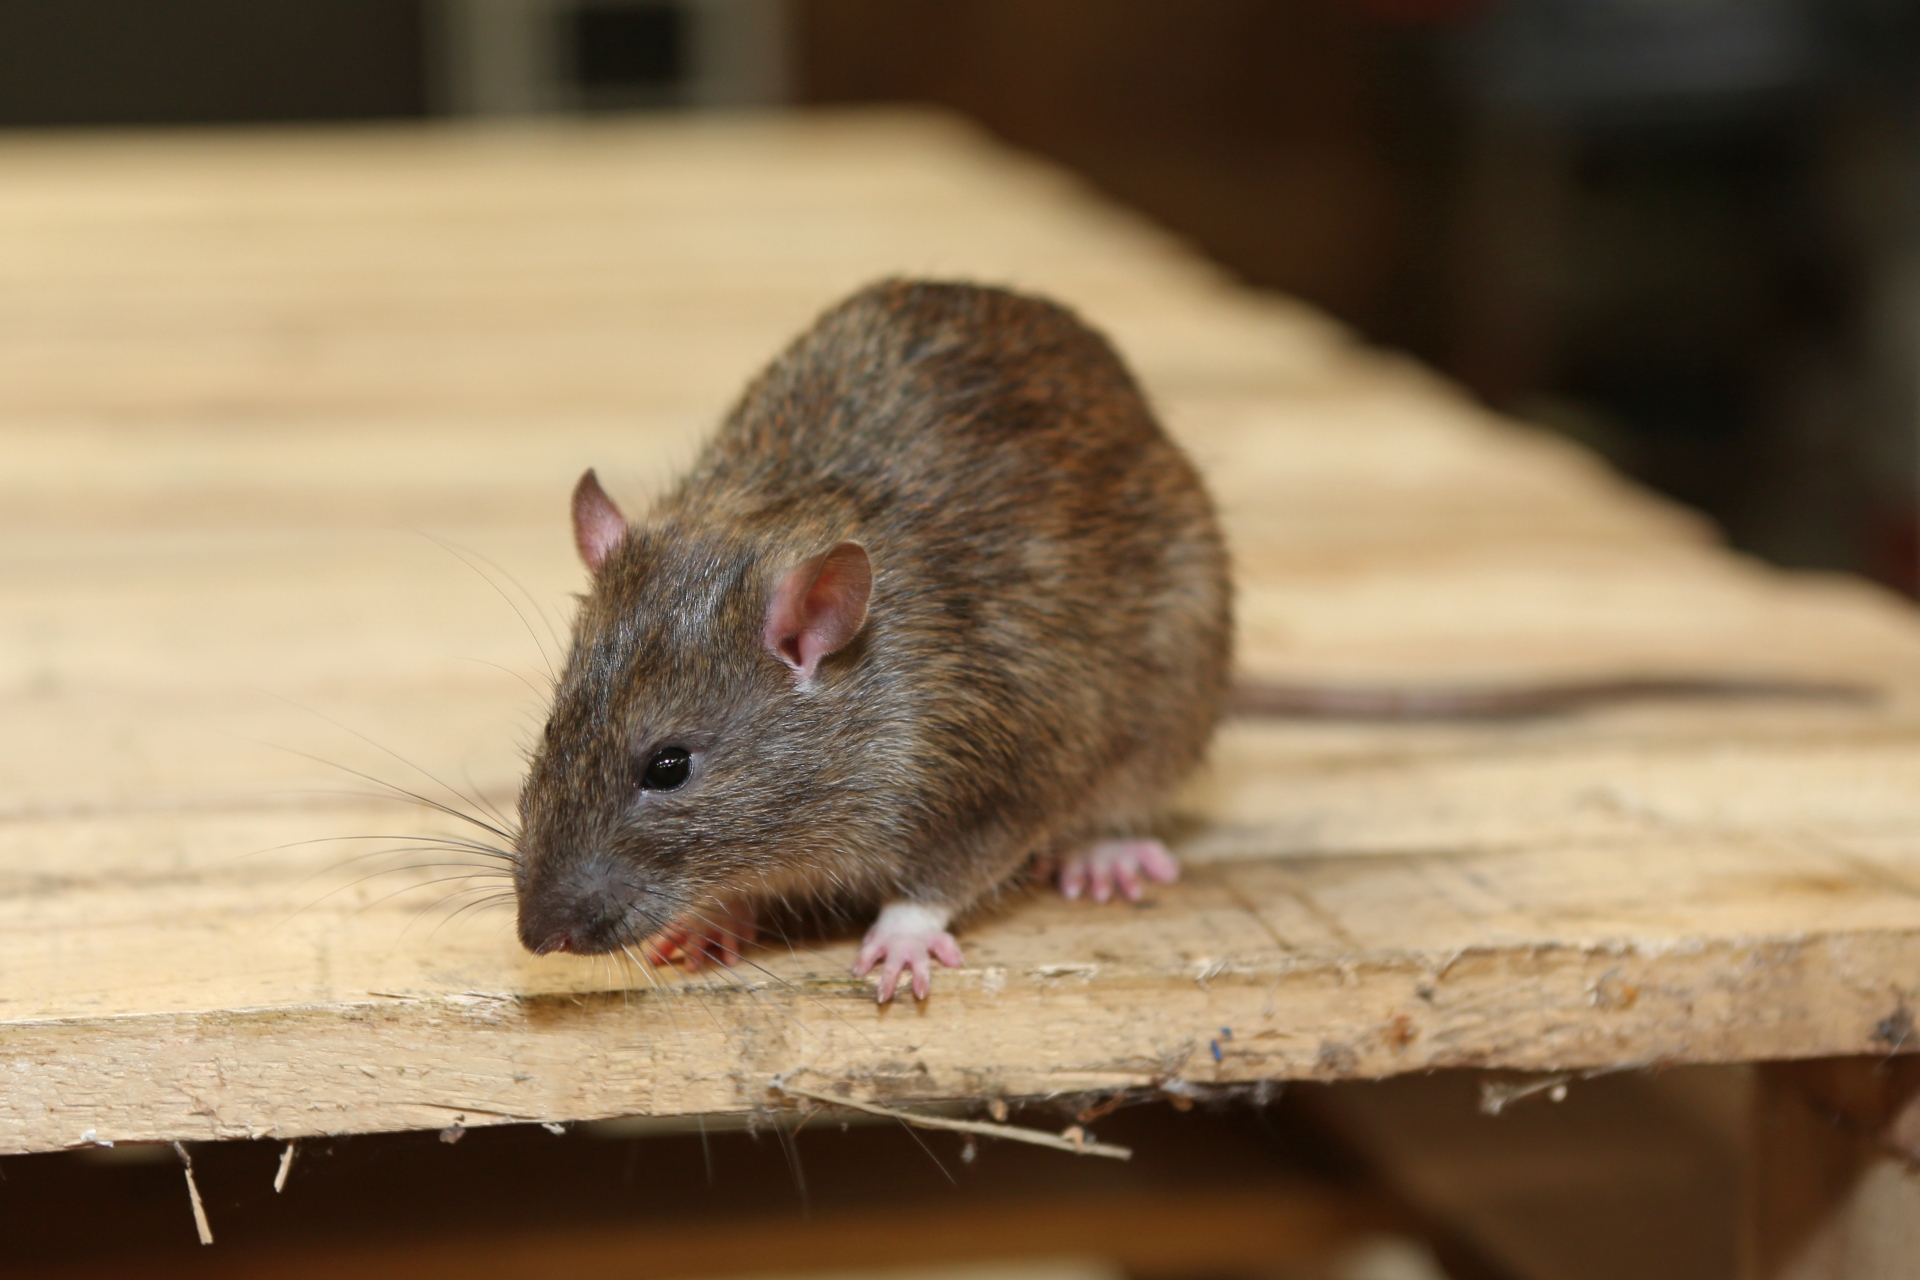 Rat Infestation, Pest Control in Archway, N19. Call Now 020 8166 9746